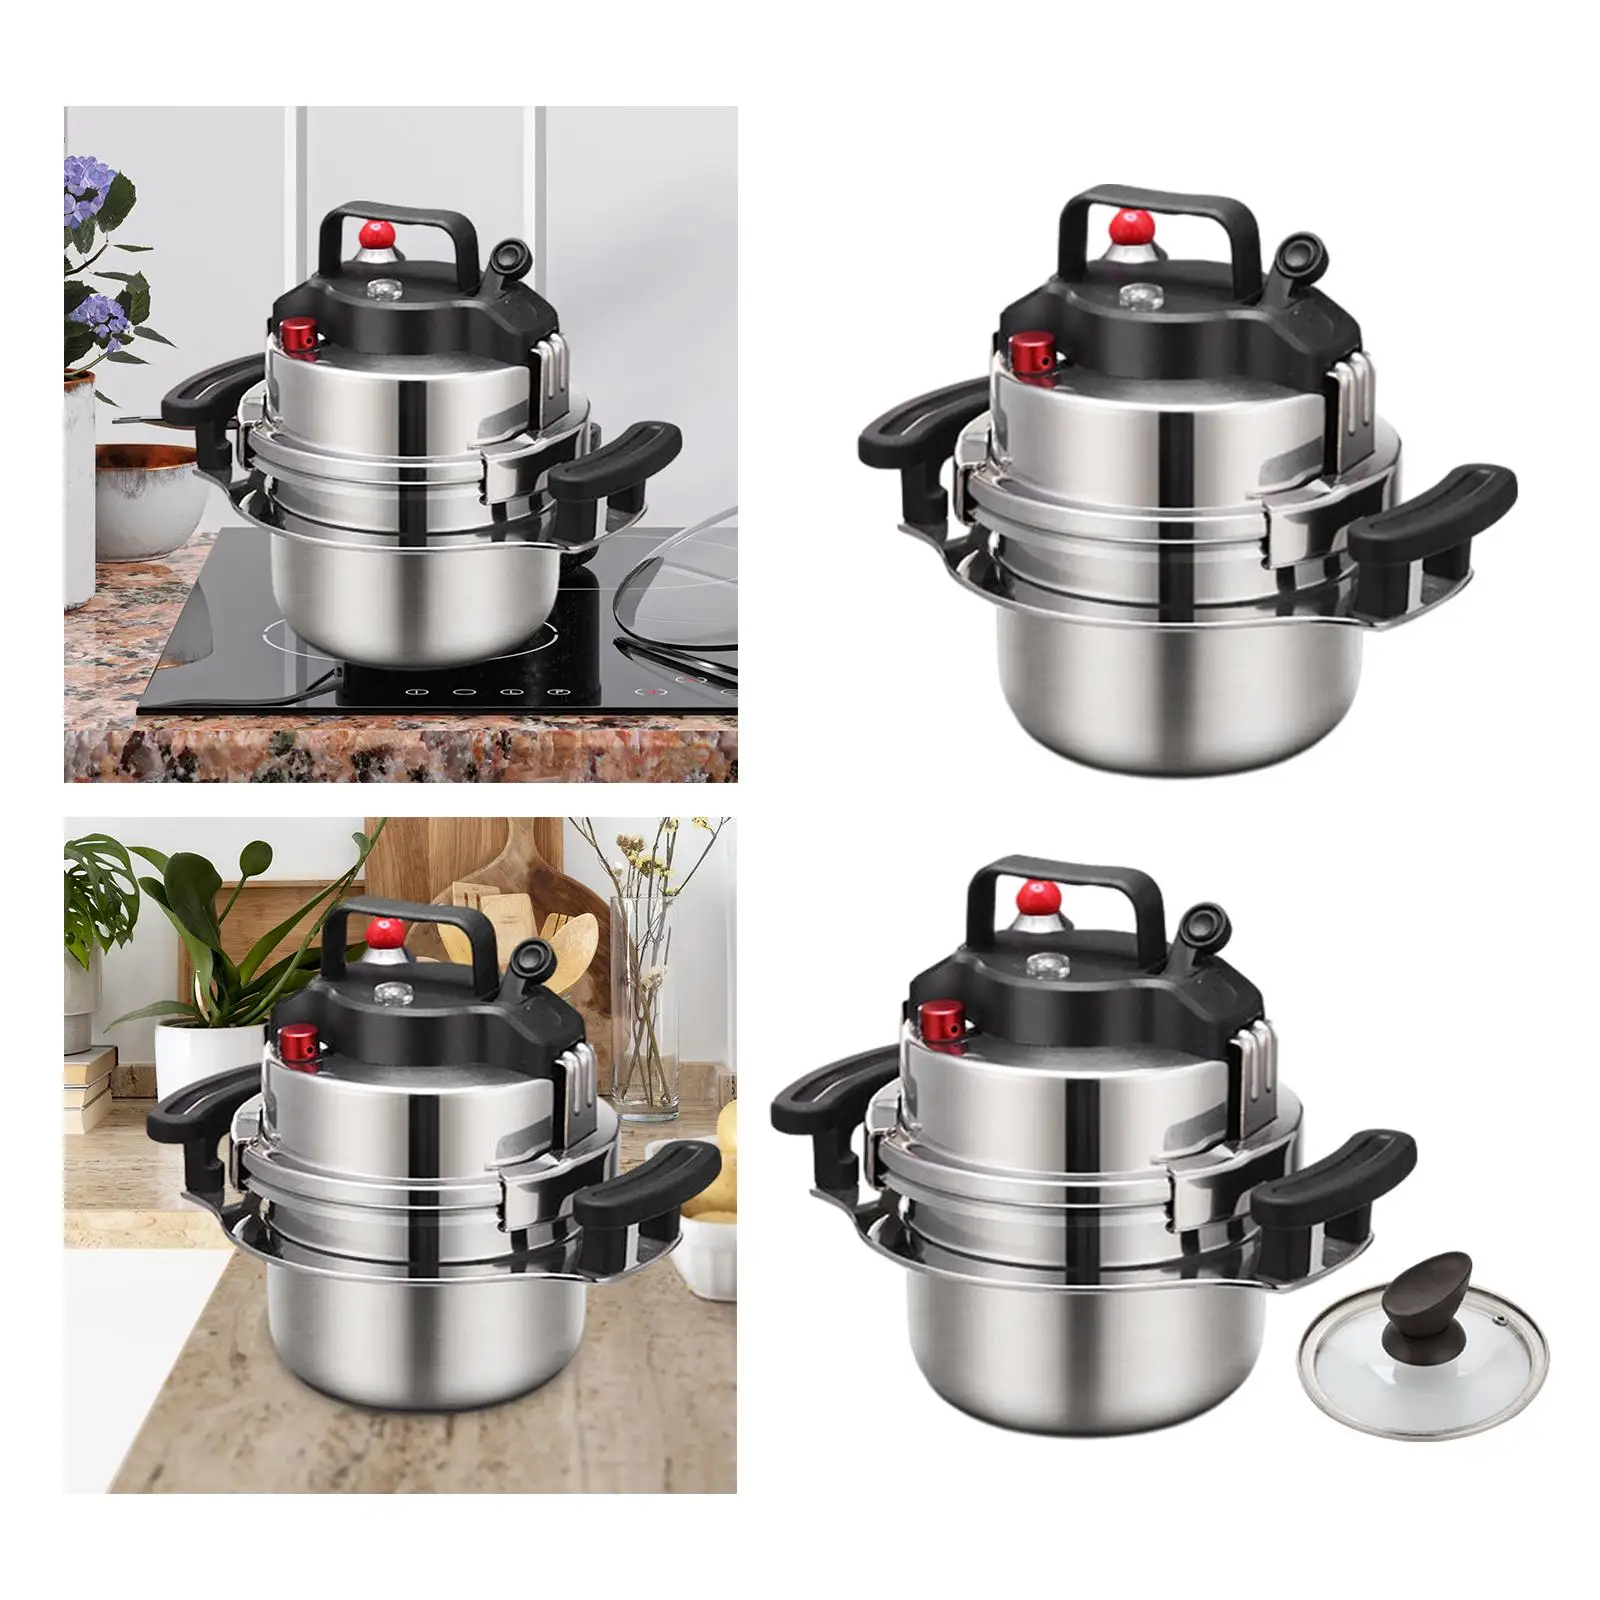 Pressure Cooker Canning Pot Nonstick with Secure Knobs Household Mini Pot Rice Cooker for Commercial BBQ Outdoor Camping Picnic